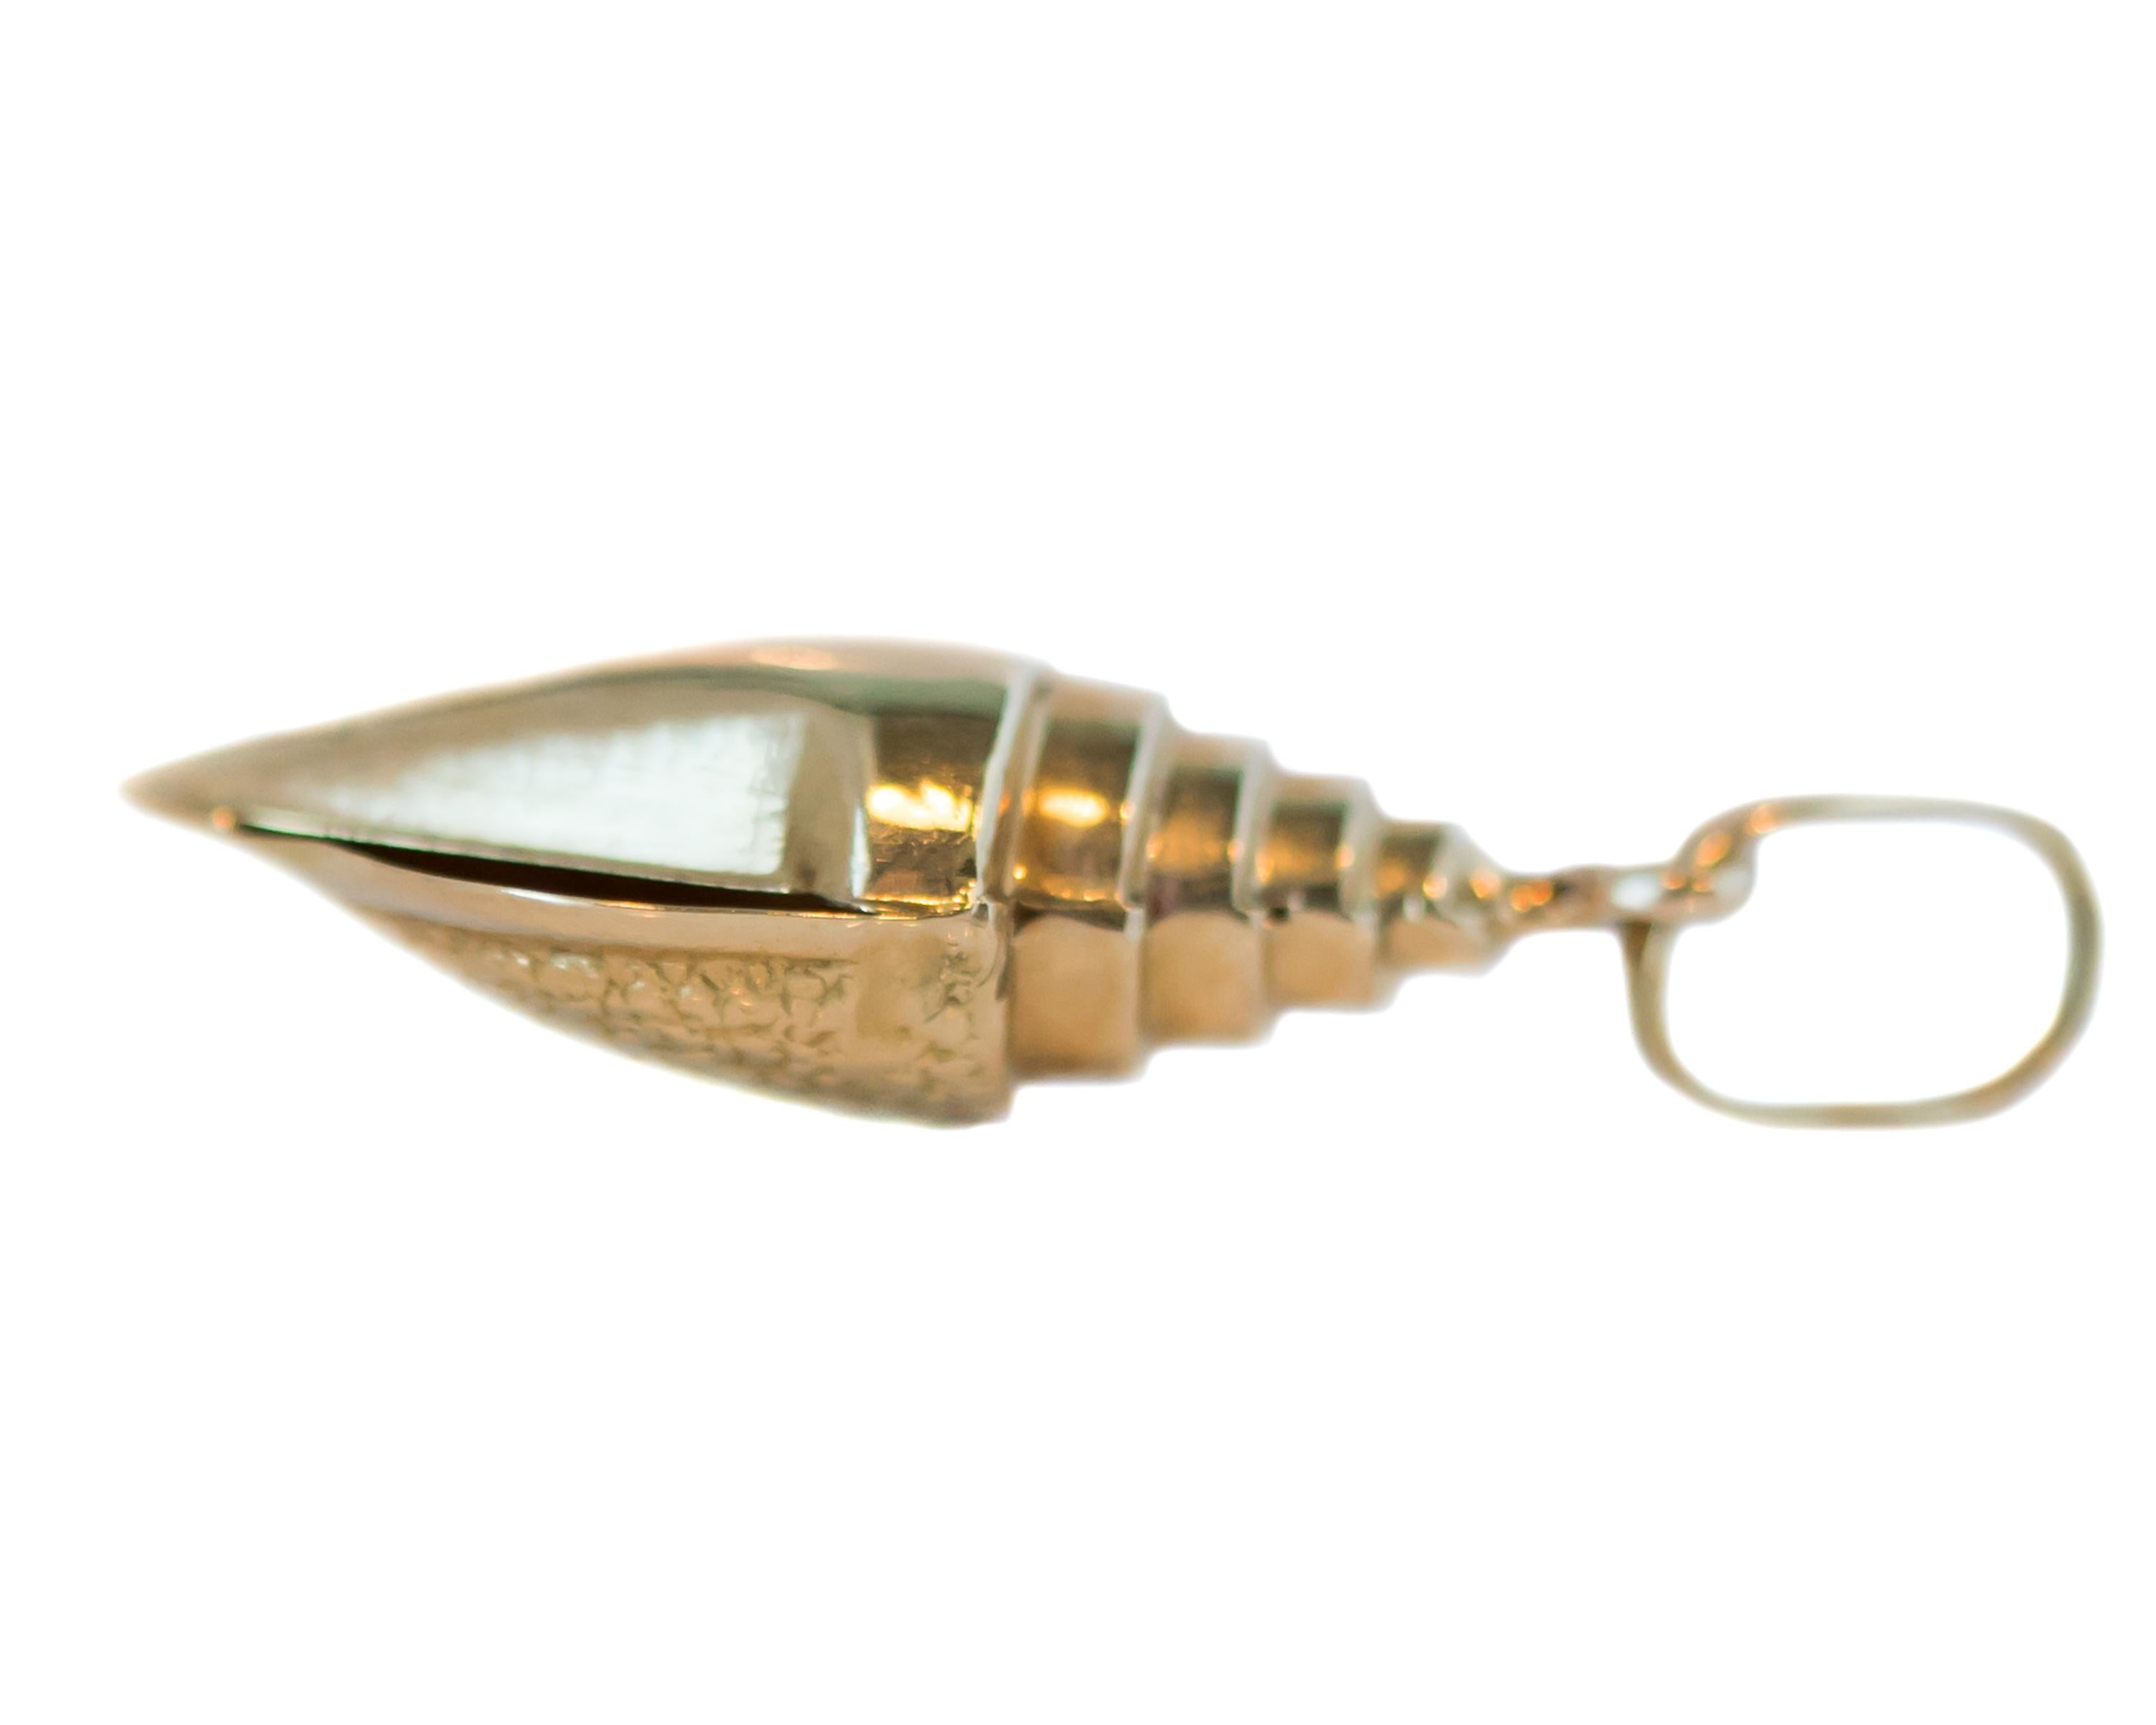 1960s Retro Conch Shell Pendant - 14 Karat Yellow Gold

Features: 
14 Karat Yellow Gold Conch Shell
Sandy Textured outer shell
Spiral Texture Top
Hollow Interior
Generous solid Bail

Shell measures 30 x 10 millimeters
It is 6.5 millimeters